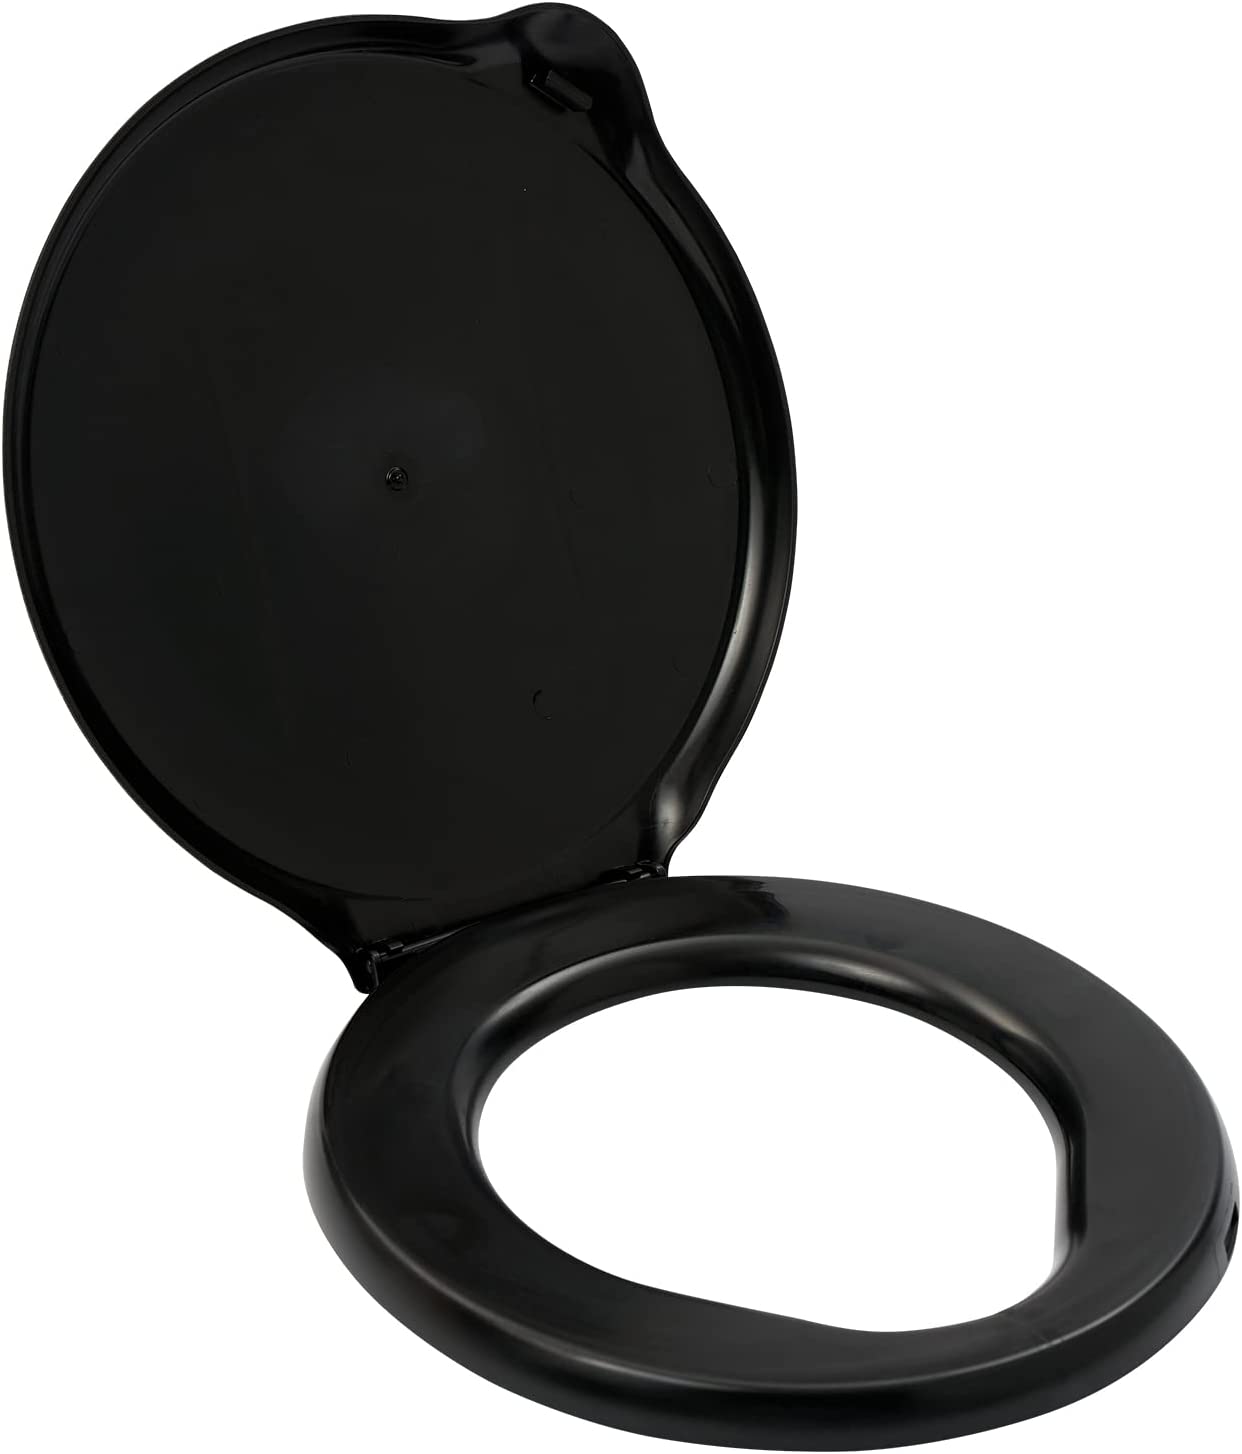 Reliance Products Luggable Loo Plastic Toilet Seat For Bucket